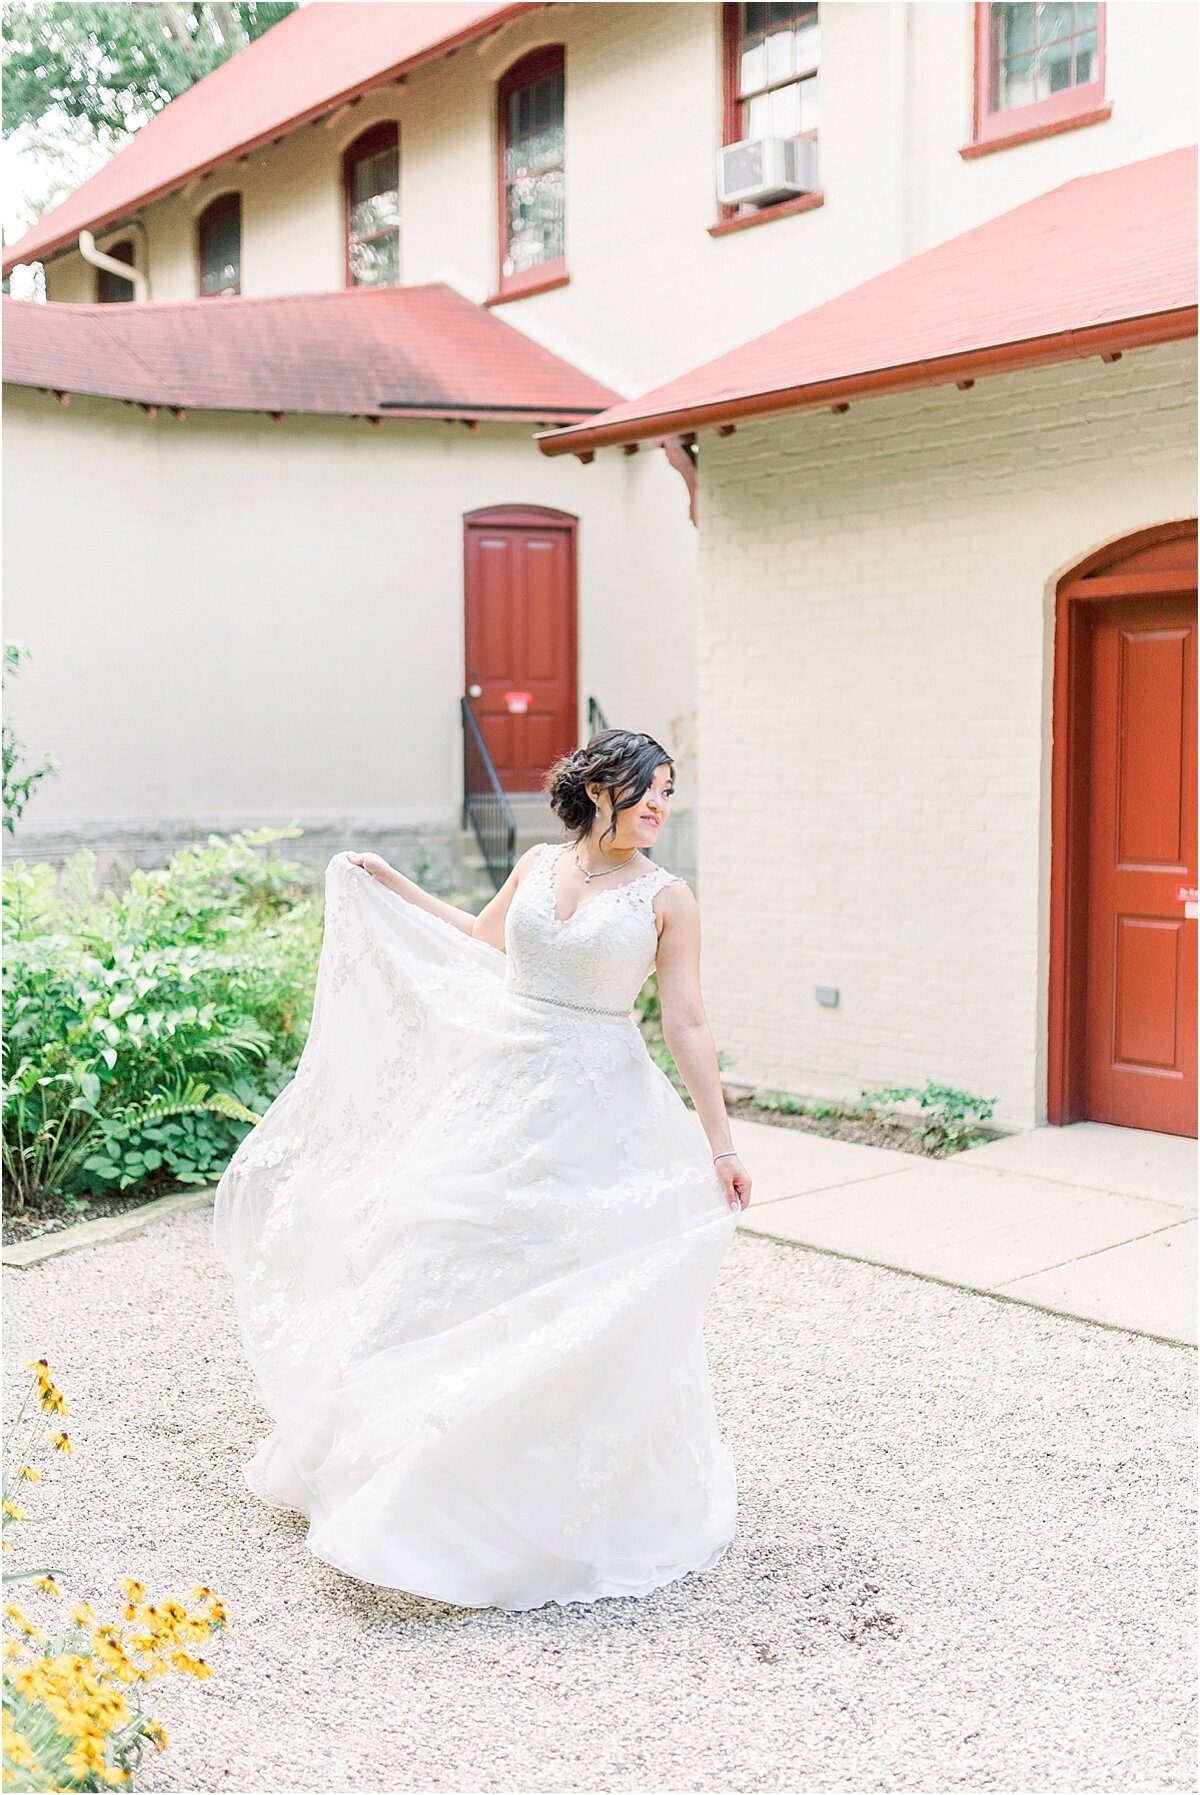 Light and Airy Wedding Photographer Chicago, Furama Chinese Wedding Photographer + Chicago Latino Photography + Naperville Wedding Photographer + Chicago Engagement Photographer + Best Photographer In Chicago_0071.jpg